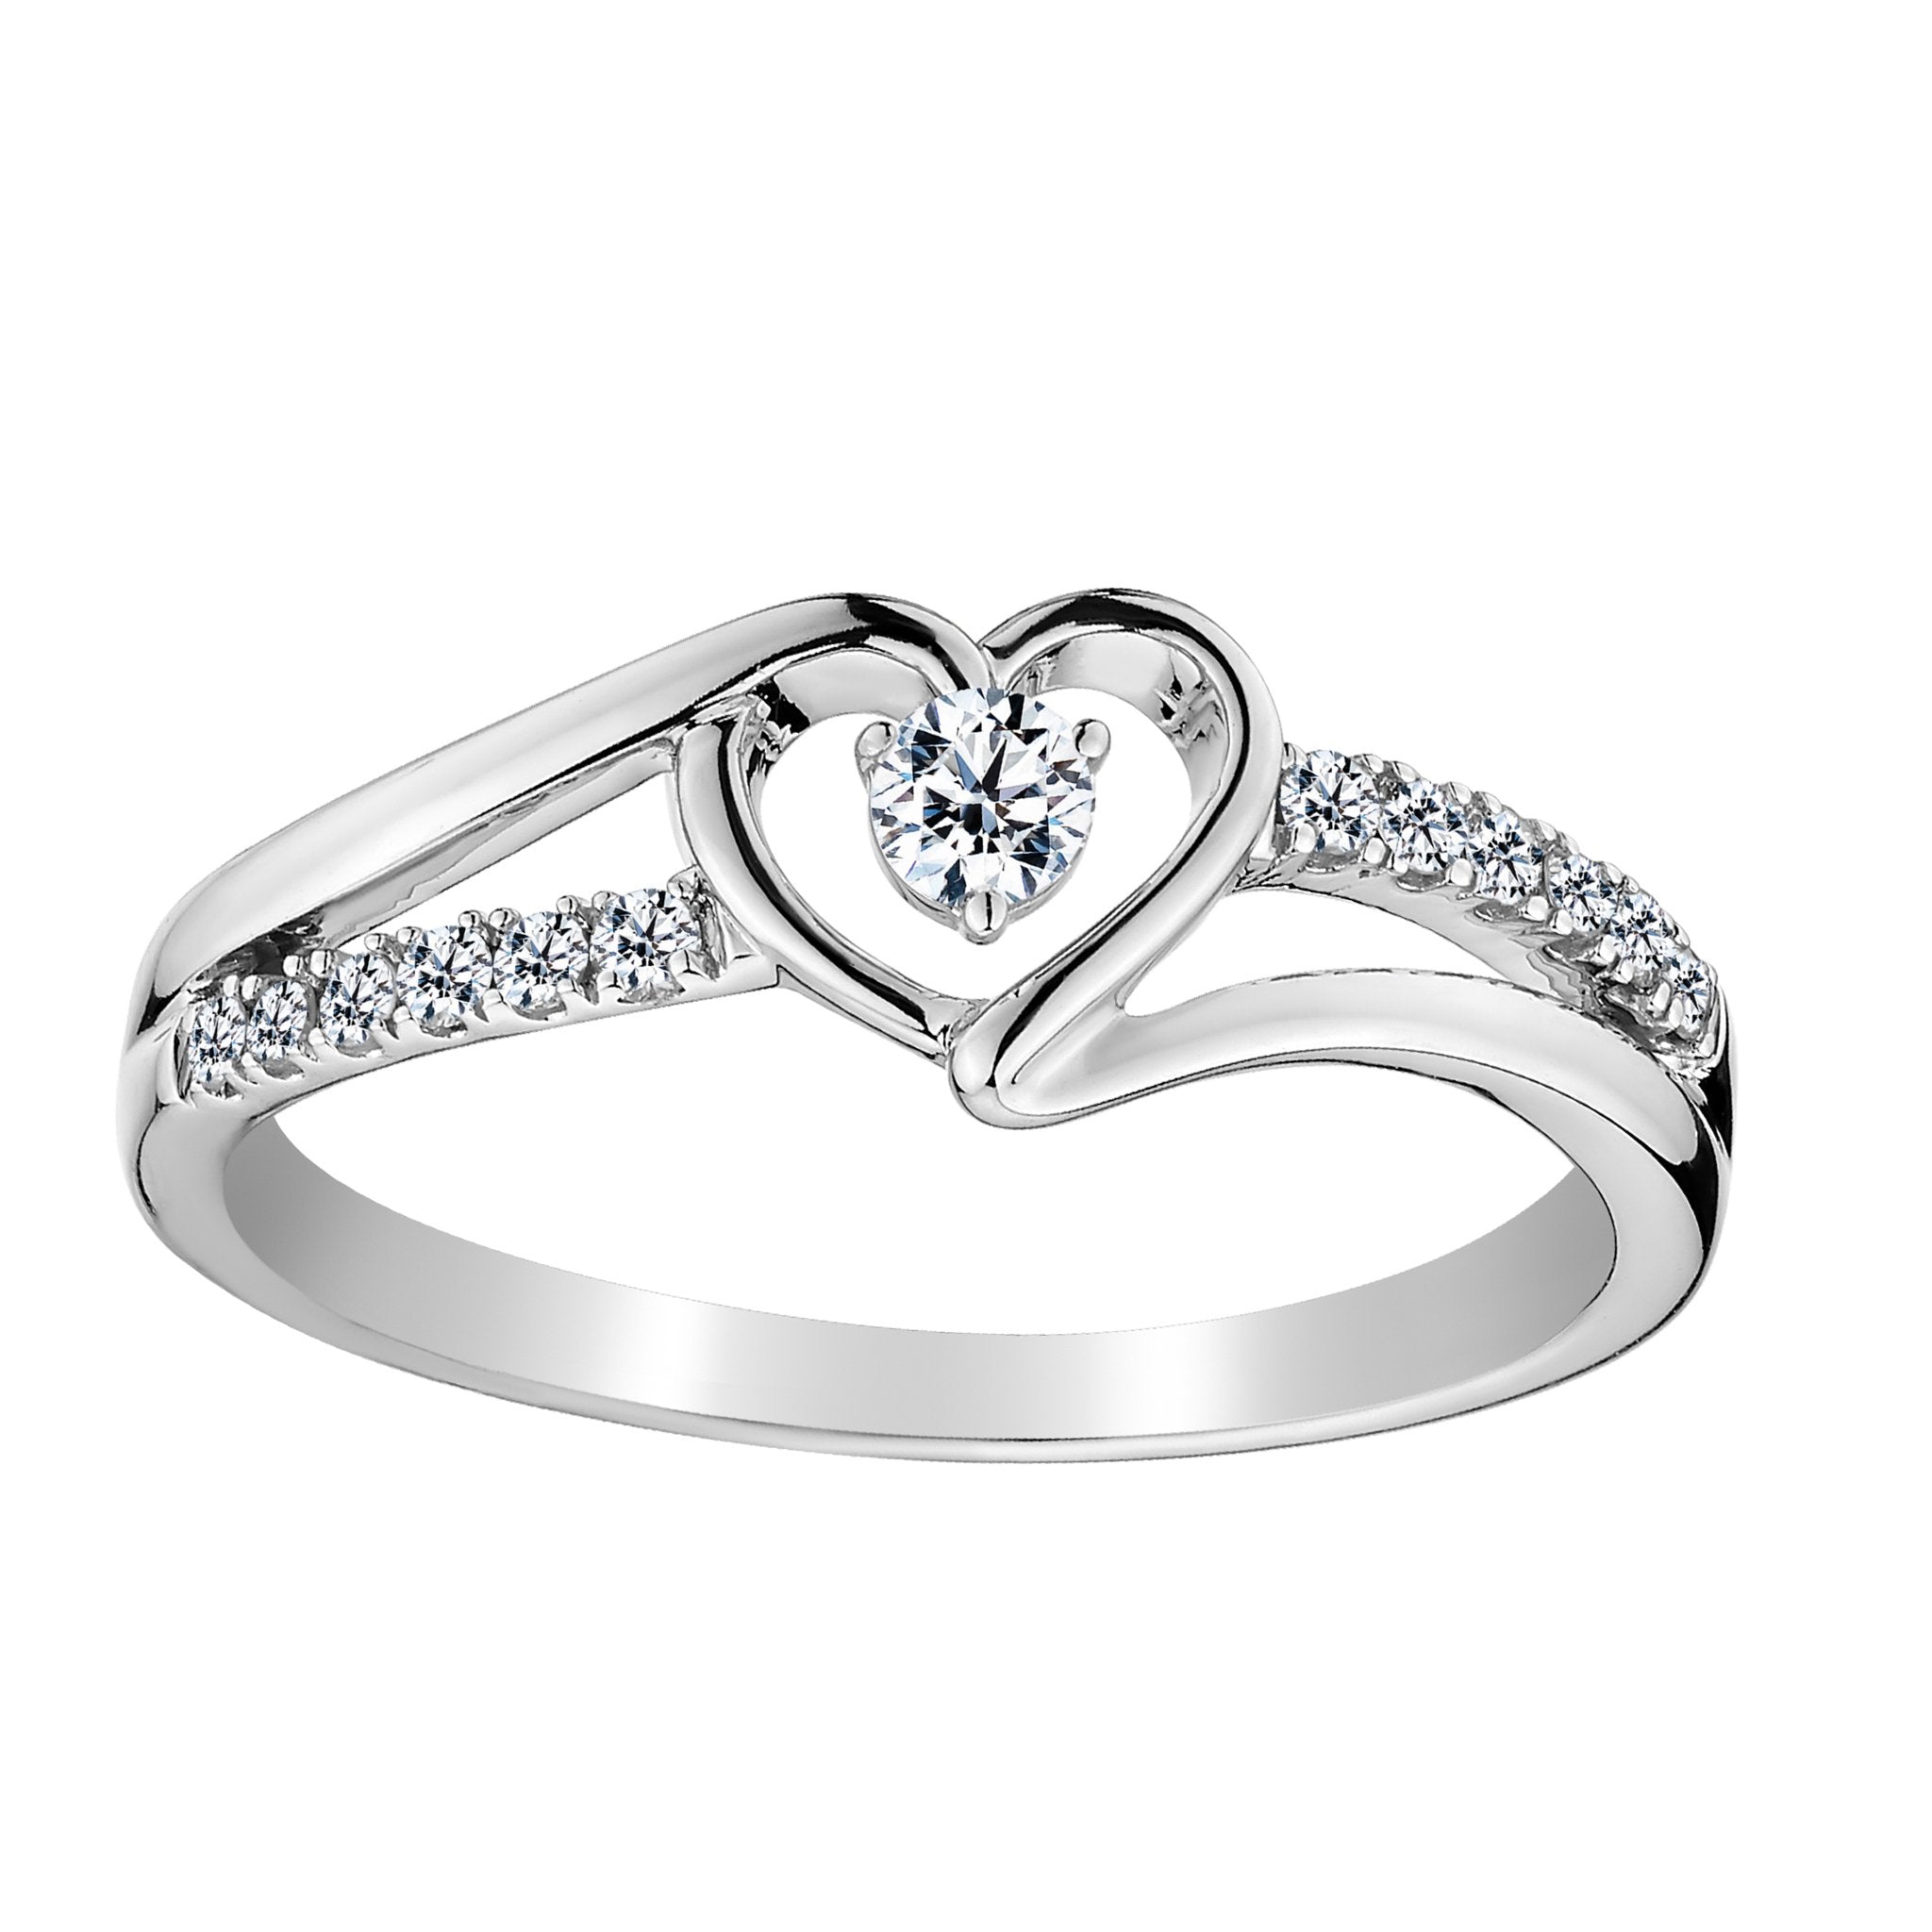 .25 Carat Diamond Heart Promise Ring, 10kt White Gold. Fashion Rings - Griffin Jewellery Designs